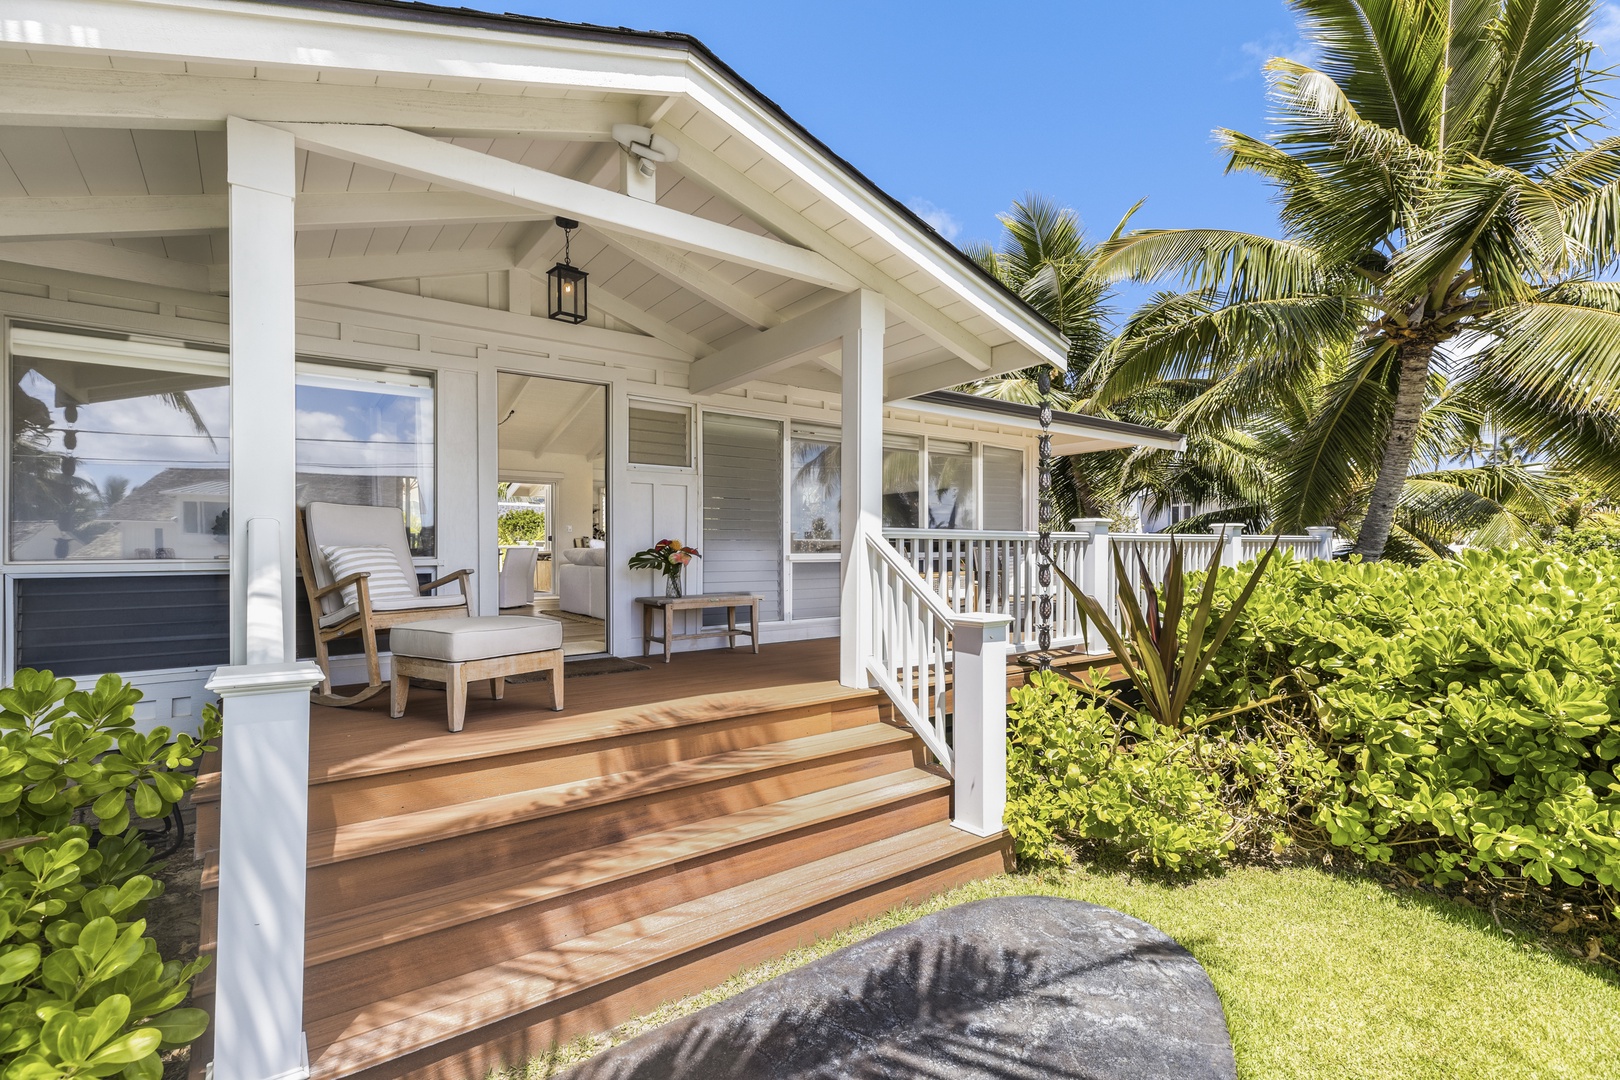 Kailua Vacation Rentals, Seahorse Beach House - A grand welcome awaits at our stunning front house entrance, where first impressions are unforgettable.